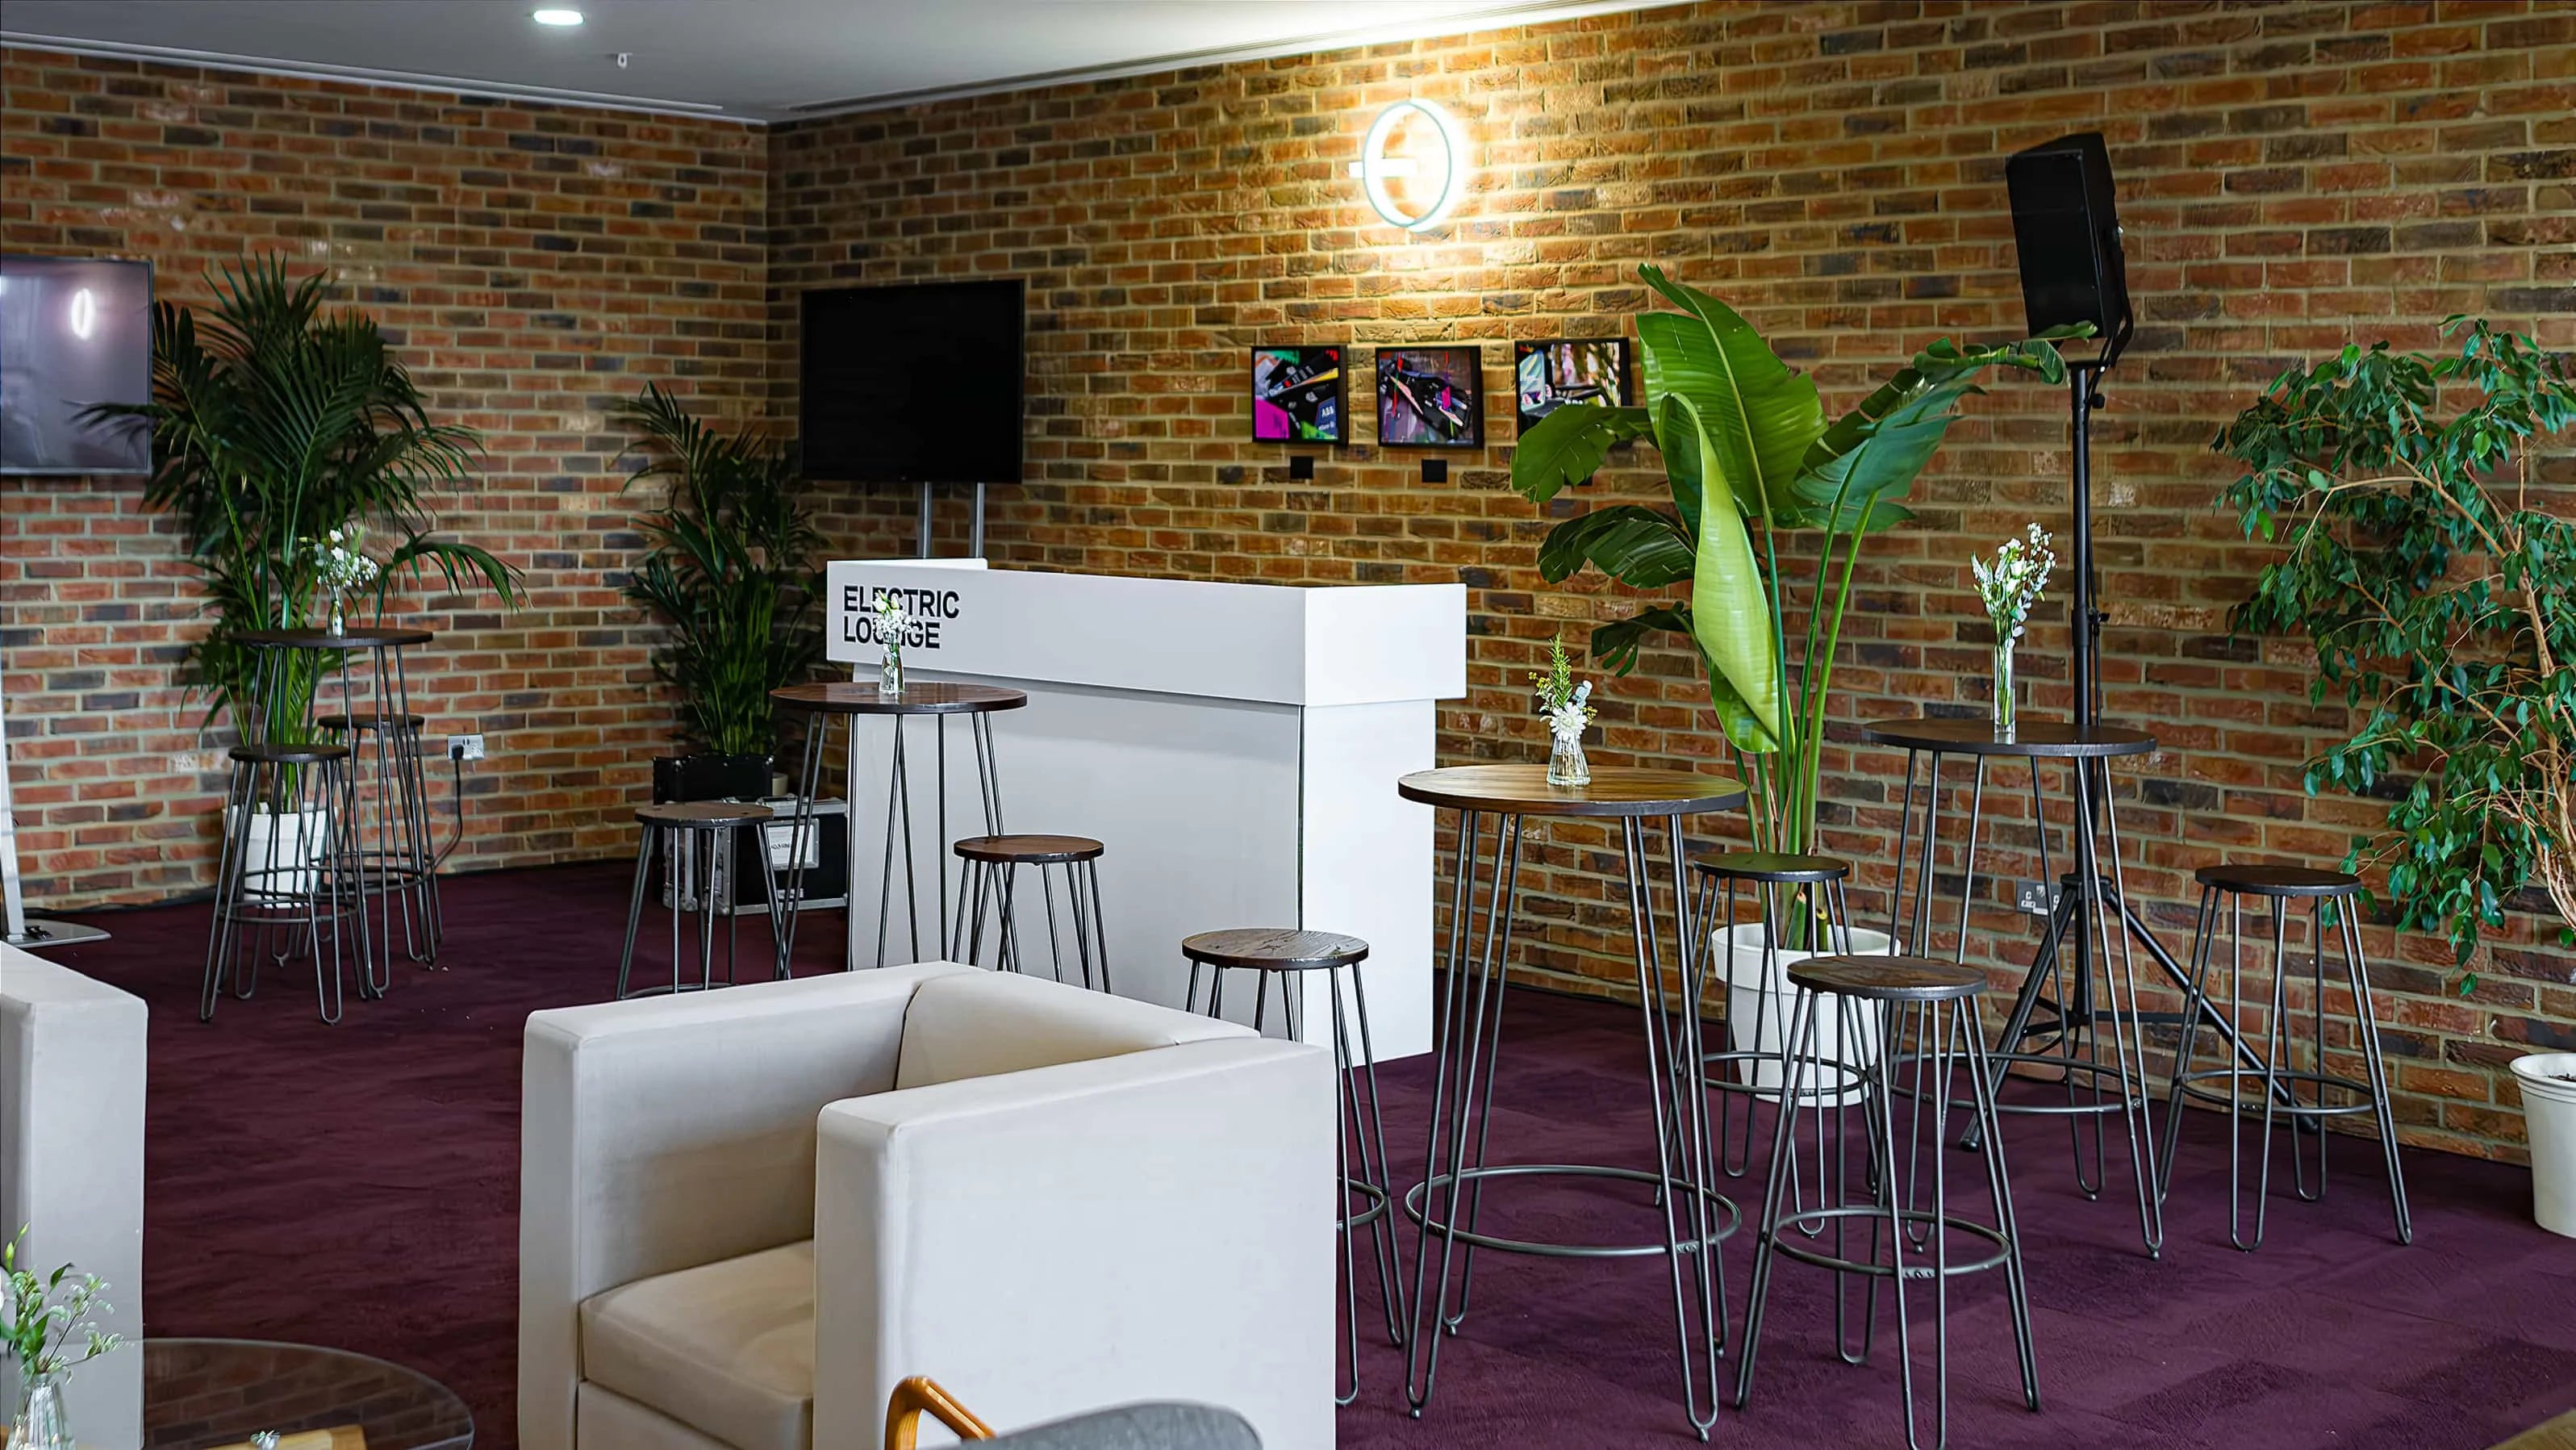 Spacious lounge setup at the Formula E event with stylish brick walls adorned with stylish planters featuring bright green plants and small floral arrangements - Amaranté London, Event Florist in London